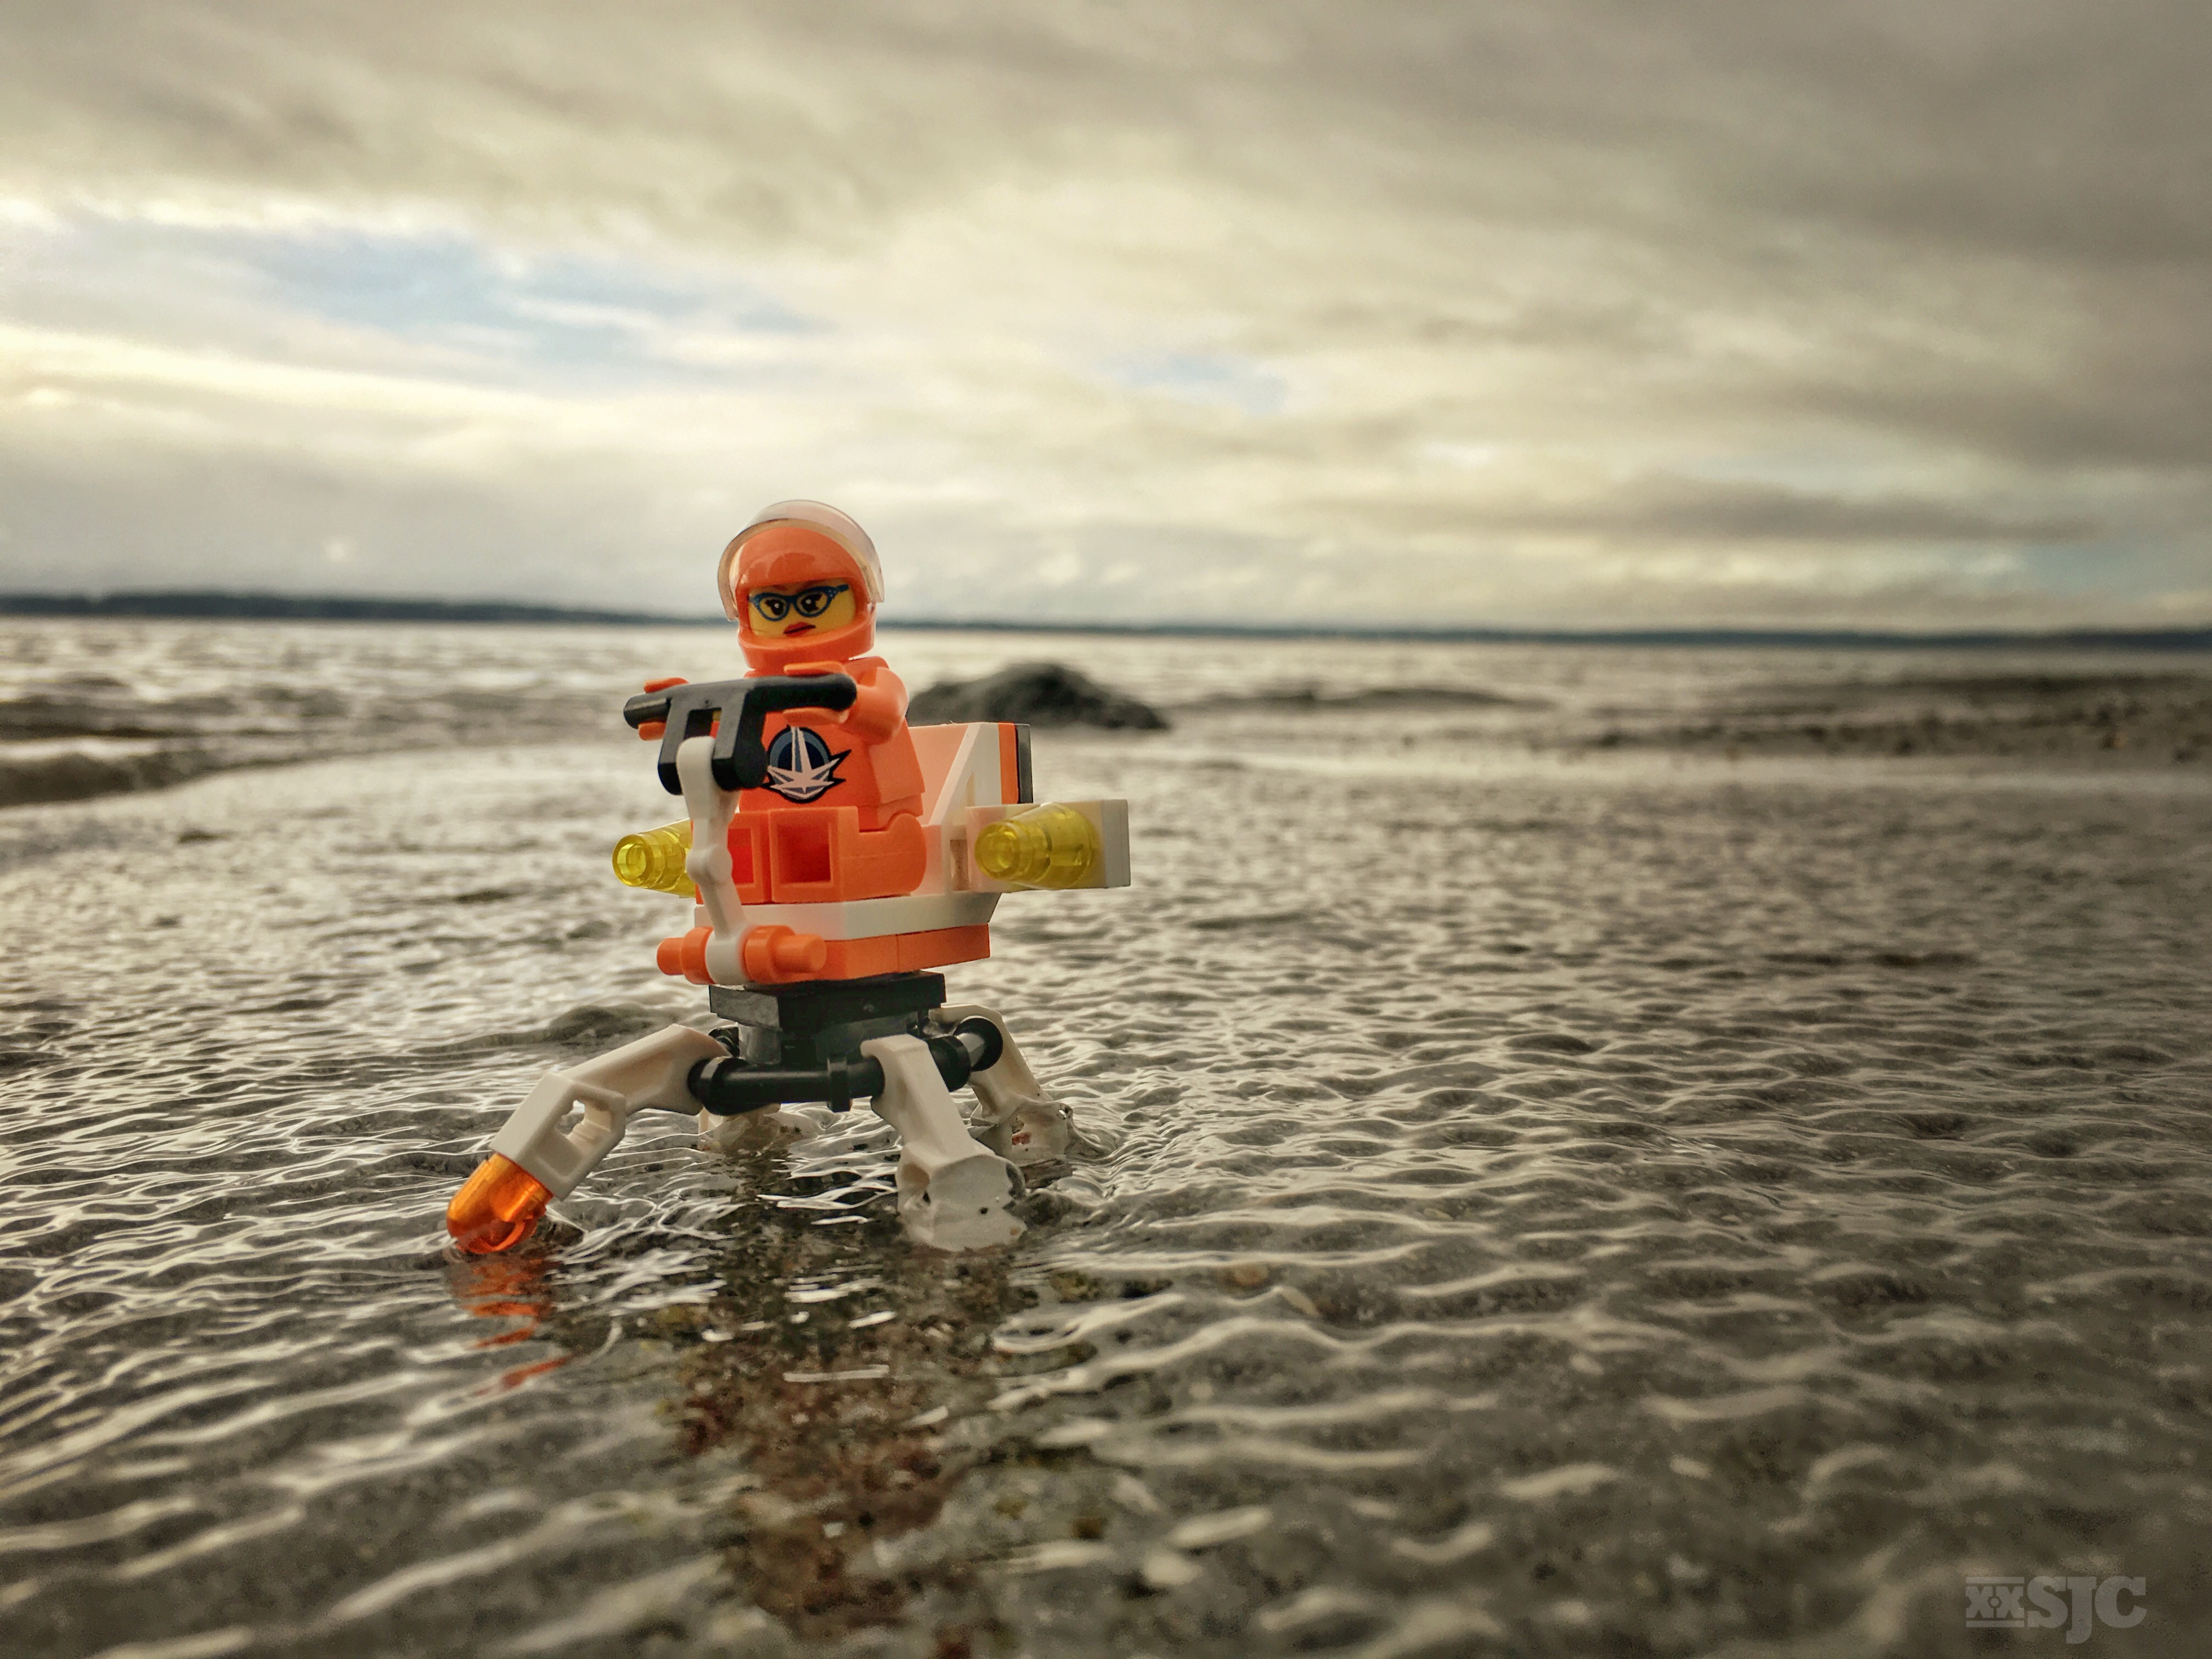 A Female LEGO explorer users her interplanetary explorer to cross a shallow bay of water.